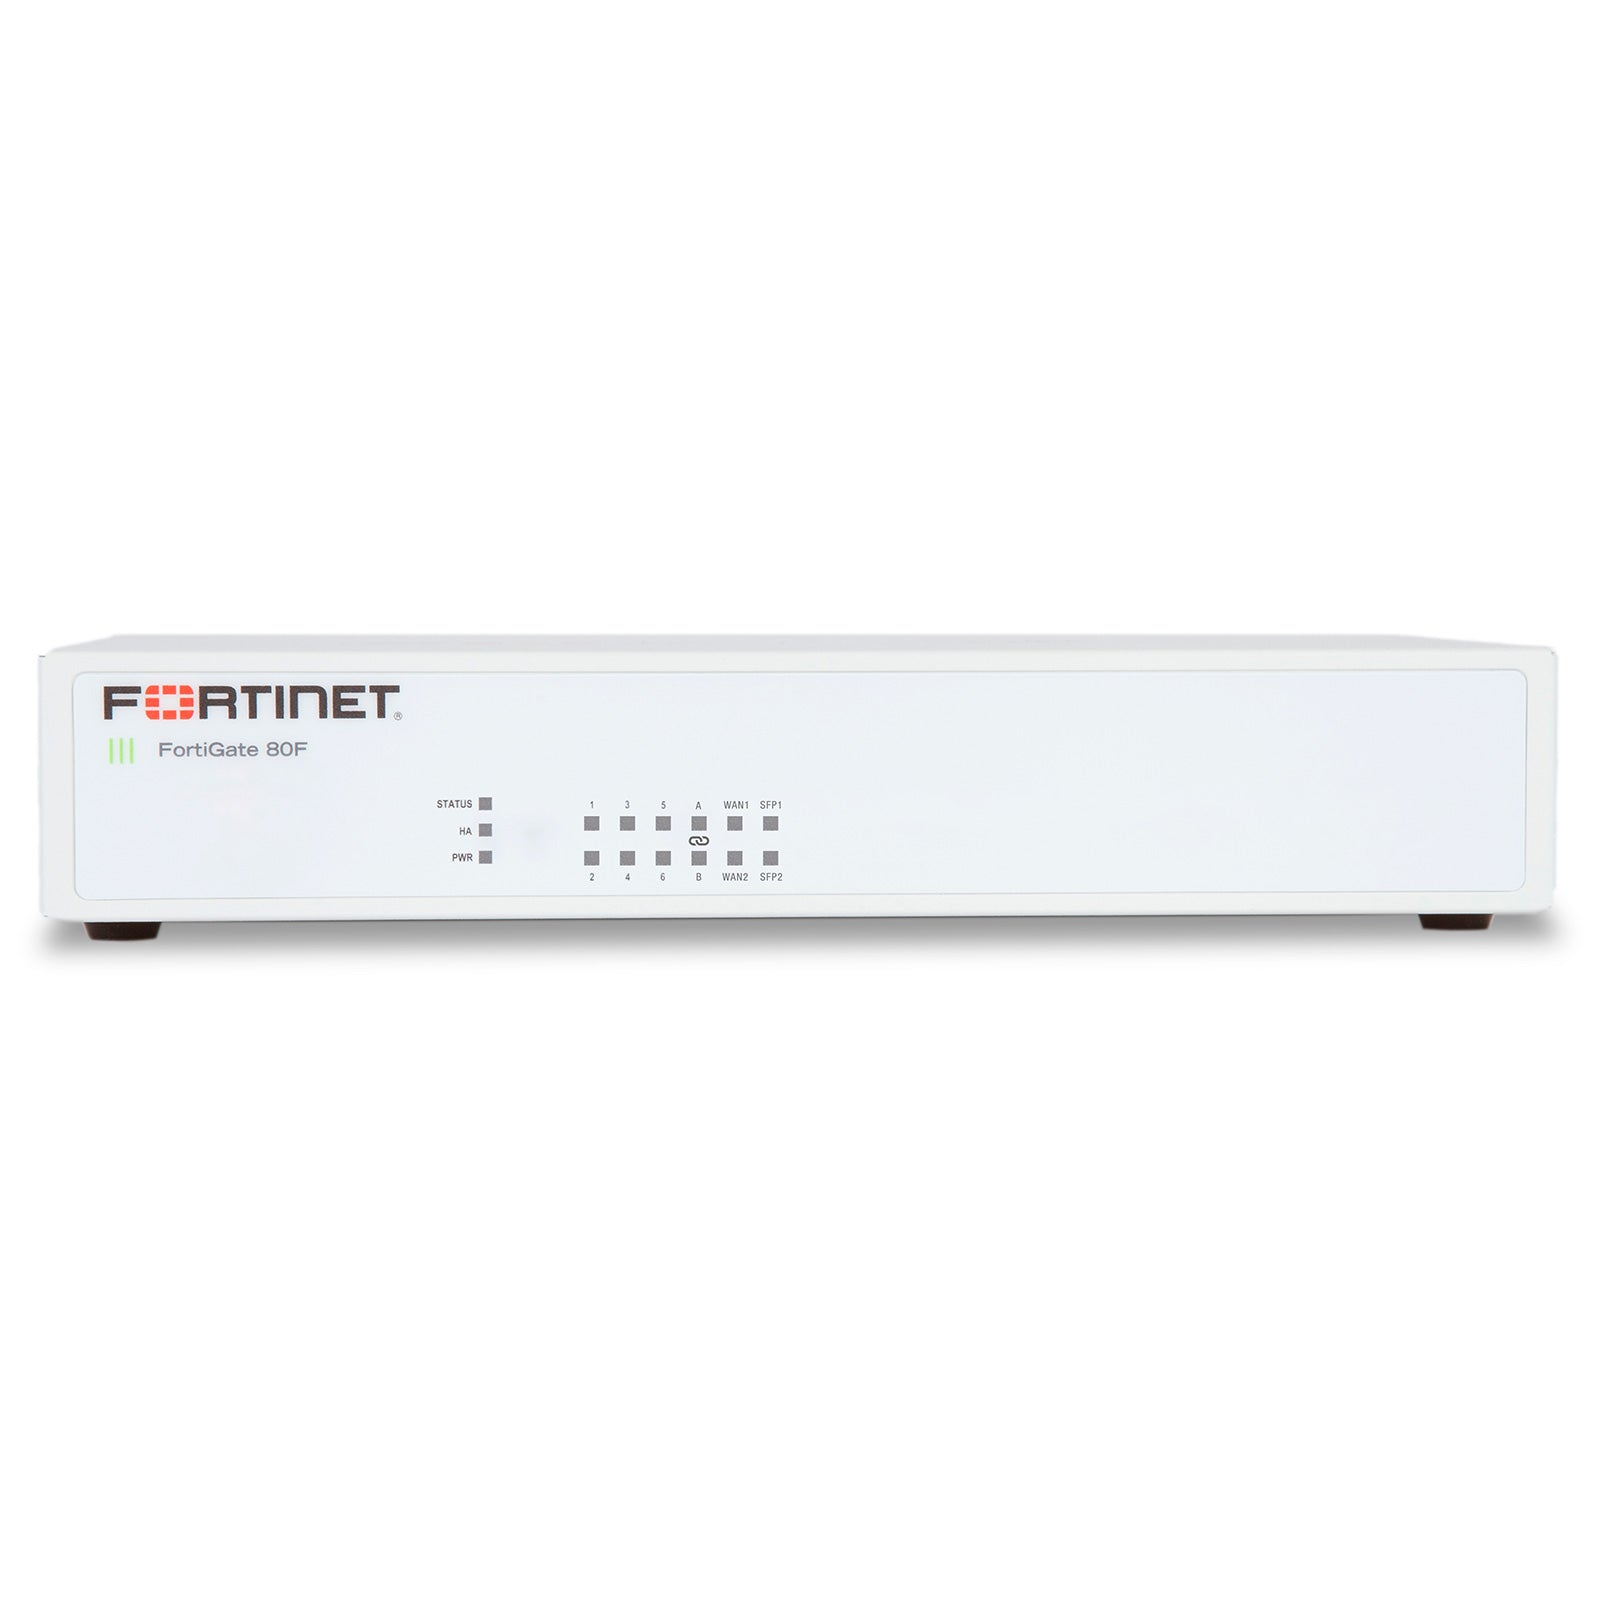 Fortinet FortiGate 80F UTM Firewall with Bundled Subscription (Local Warranty in Singapore) - Win-Pro Consultancy Pte Ltd